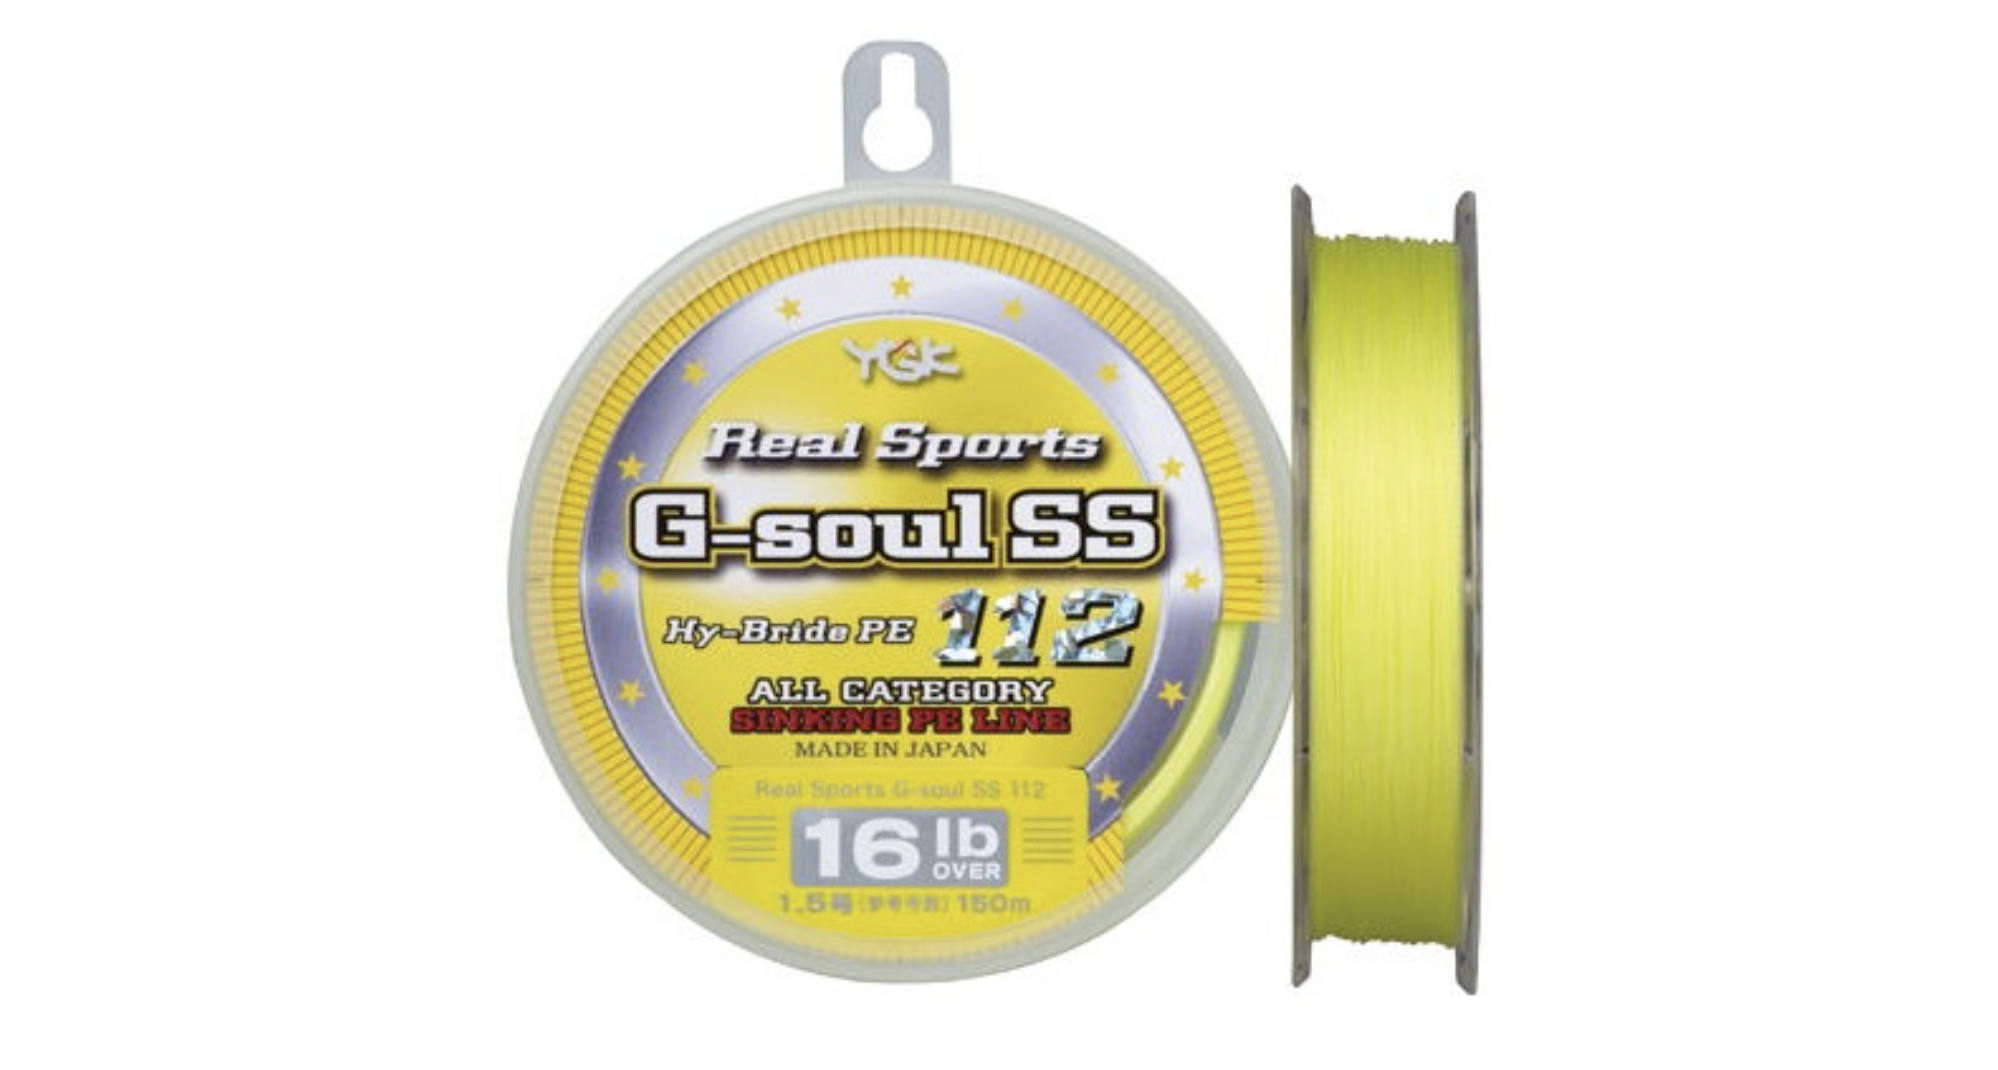 Best Braided Fishing Line under 50 in 2022 – Top Priority Products